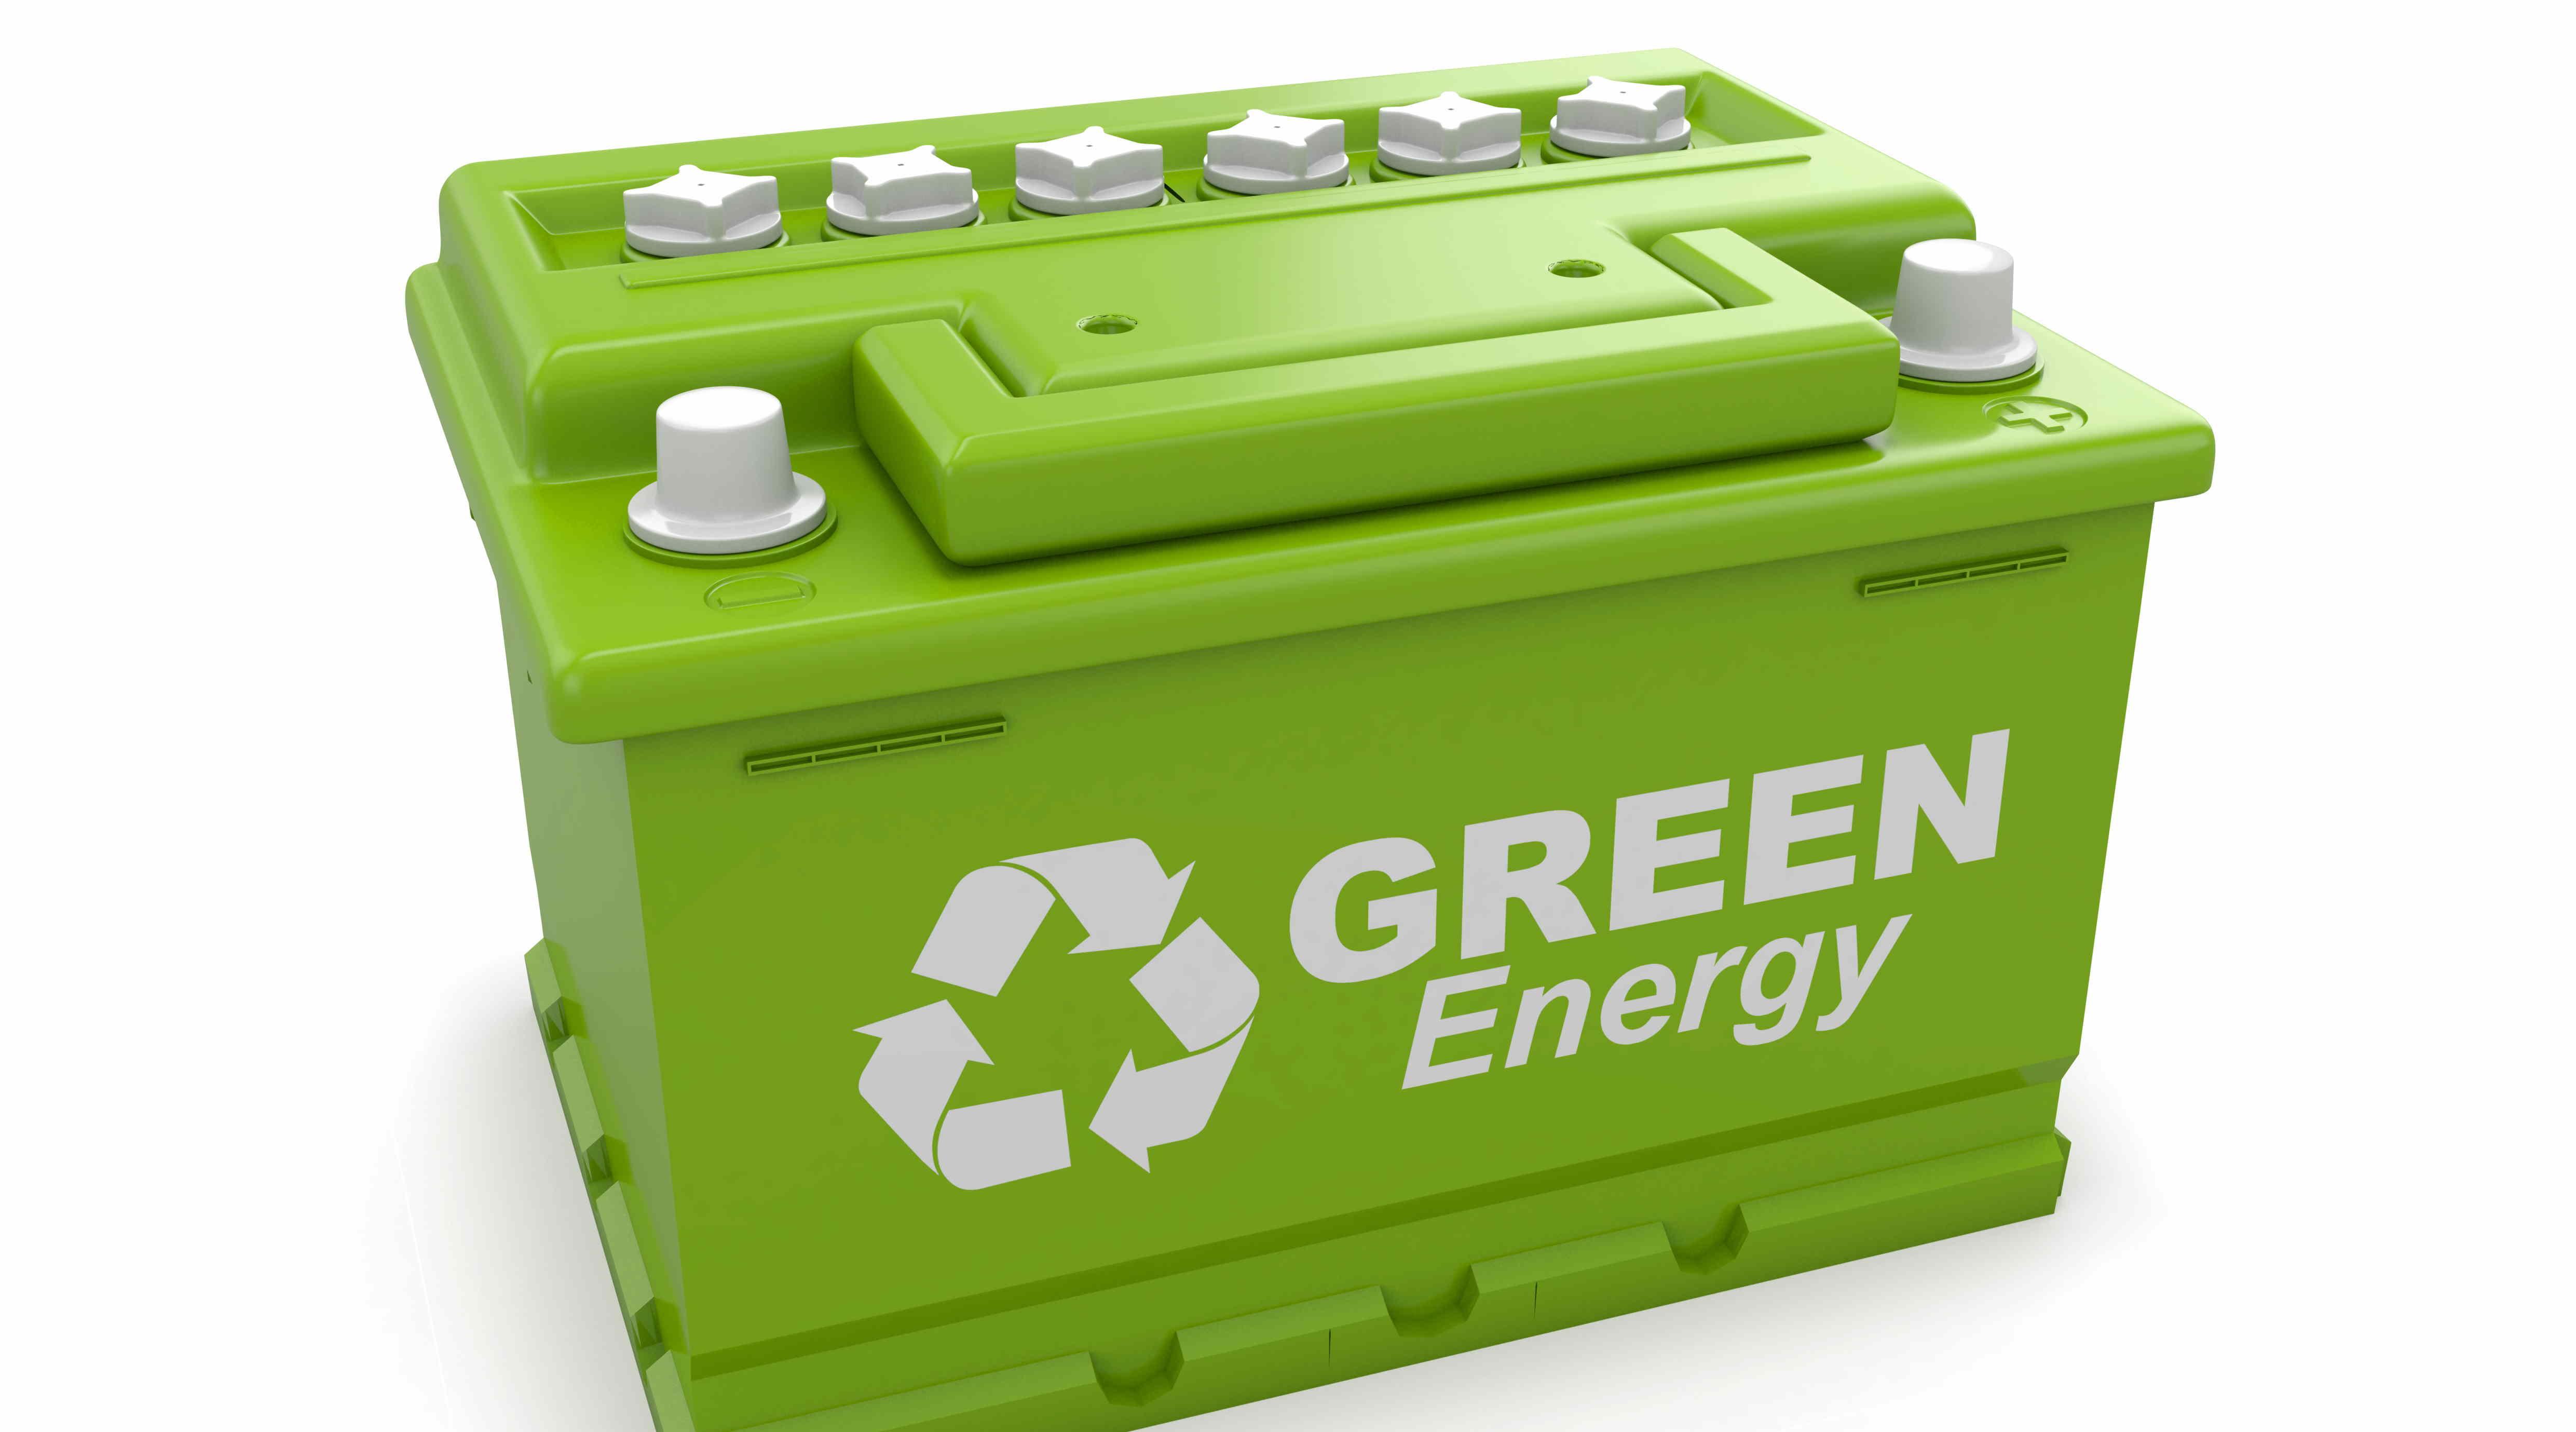 Car battery in green with Green Energy logo